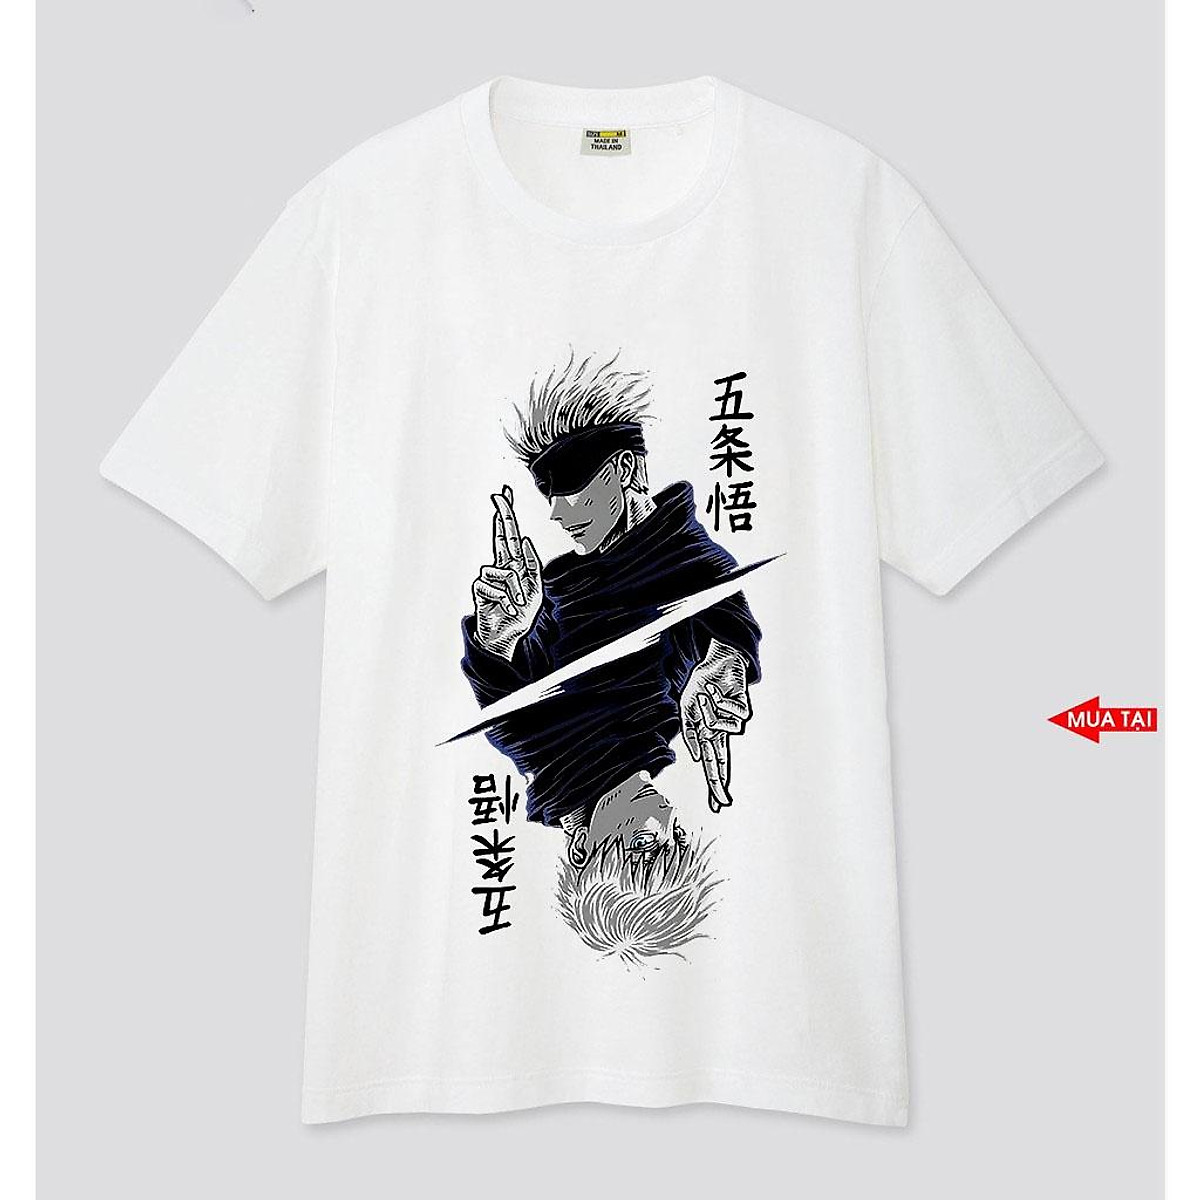 UNIQLO Releases Detective Conan UT Apparel Collection on May 22